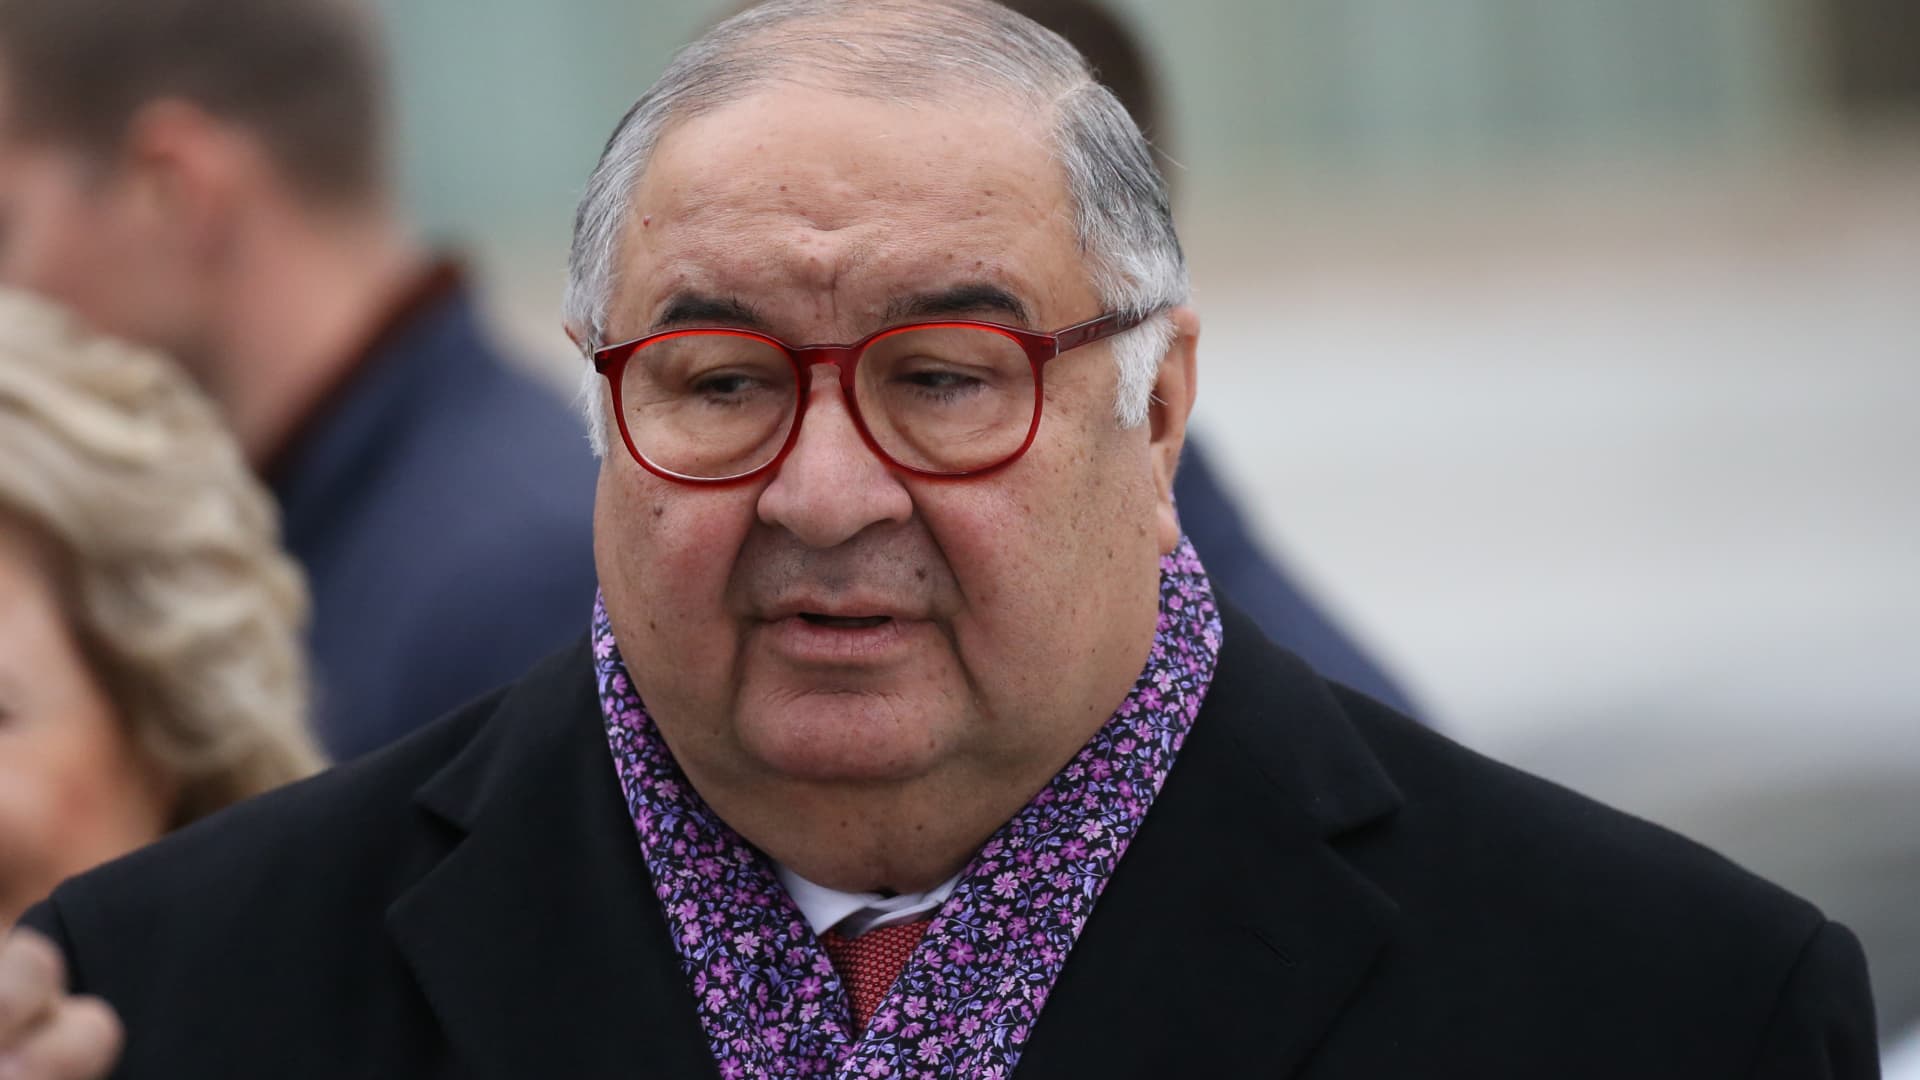 Russian billionaire and businessman Alisher Usmanov arrives to the openings of new monument to former Russian Prime Minister Yegeny Primakov at Smolenskaya Square inin Central Moscow, Russia, October,29,2019. Politician and diplomat Yegeny Primakov died in 2015.